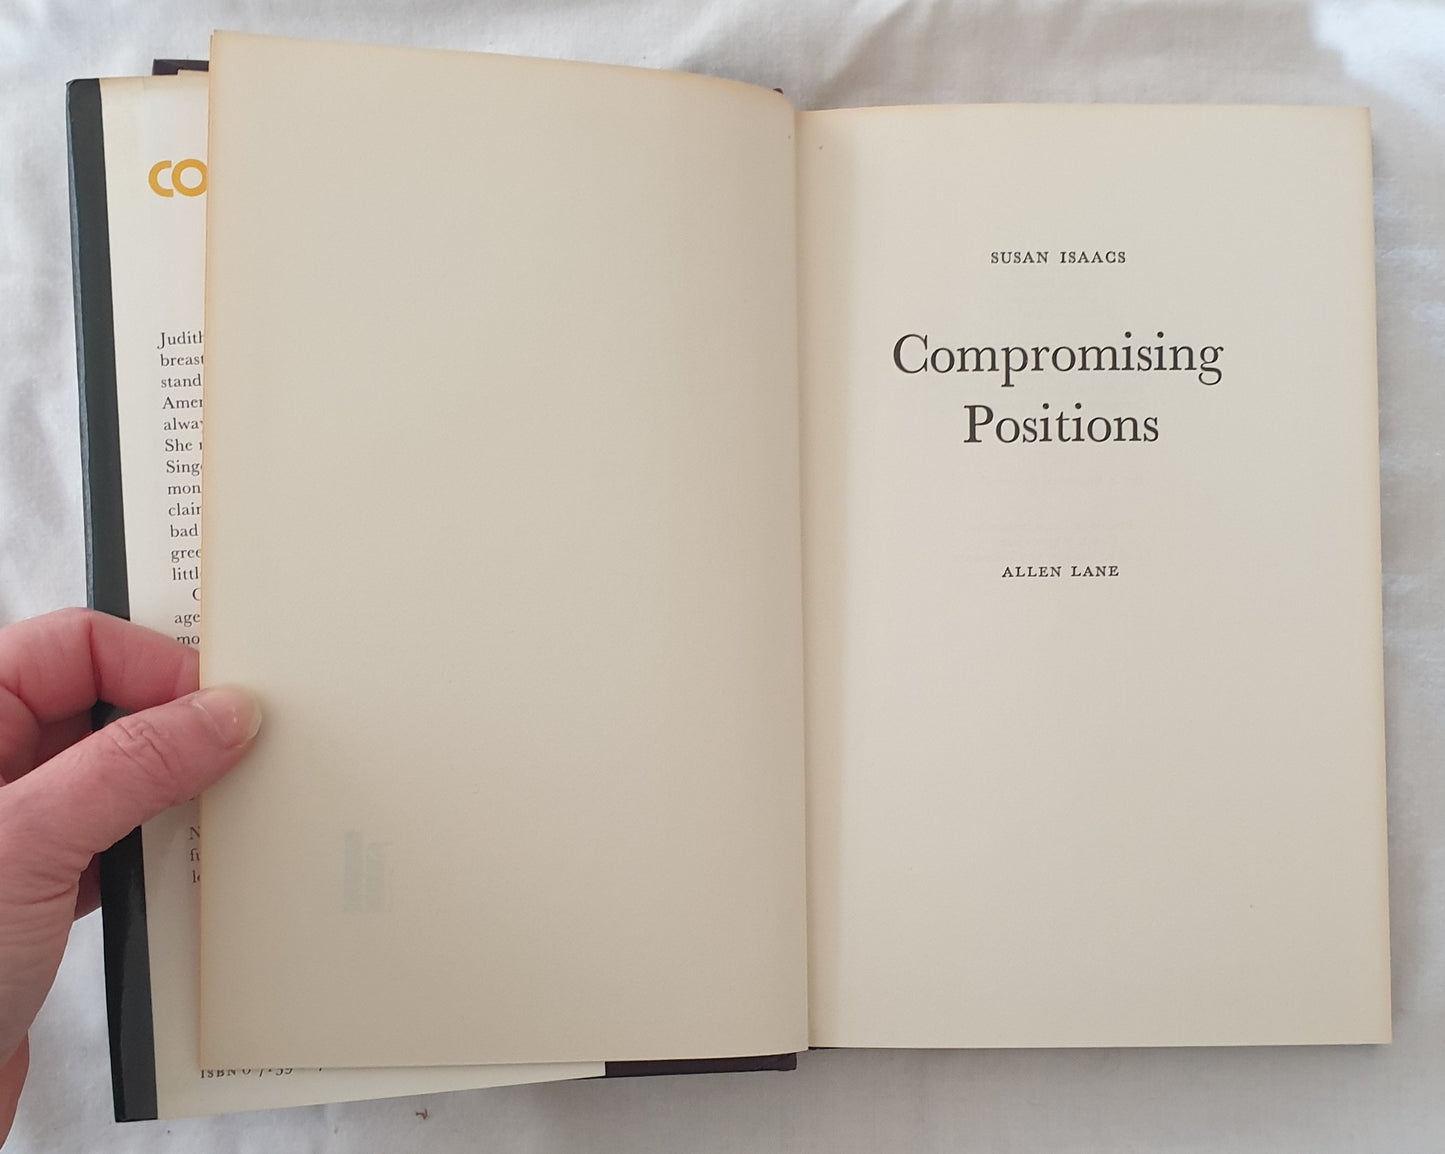 Compromising Positions by Susan Isaacs